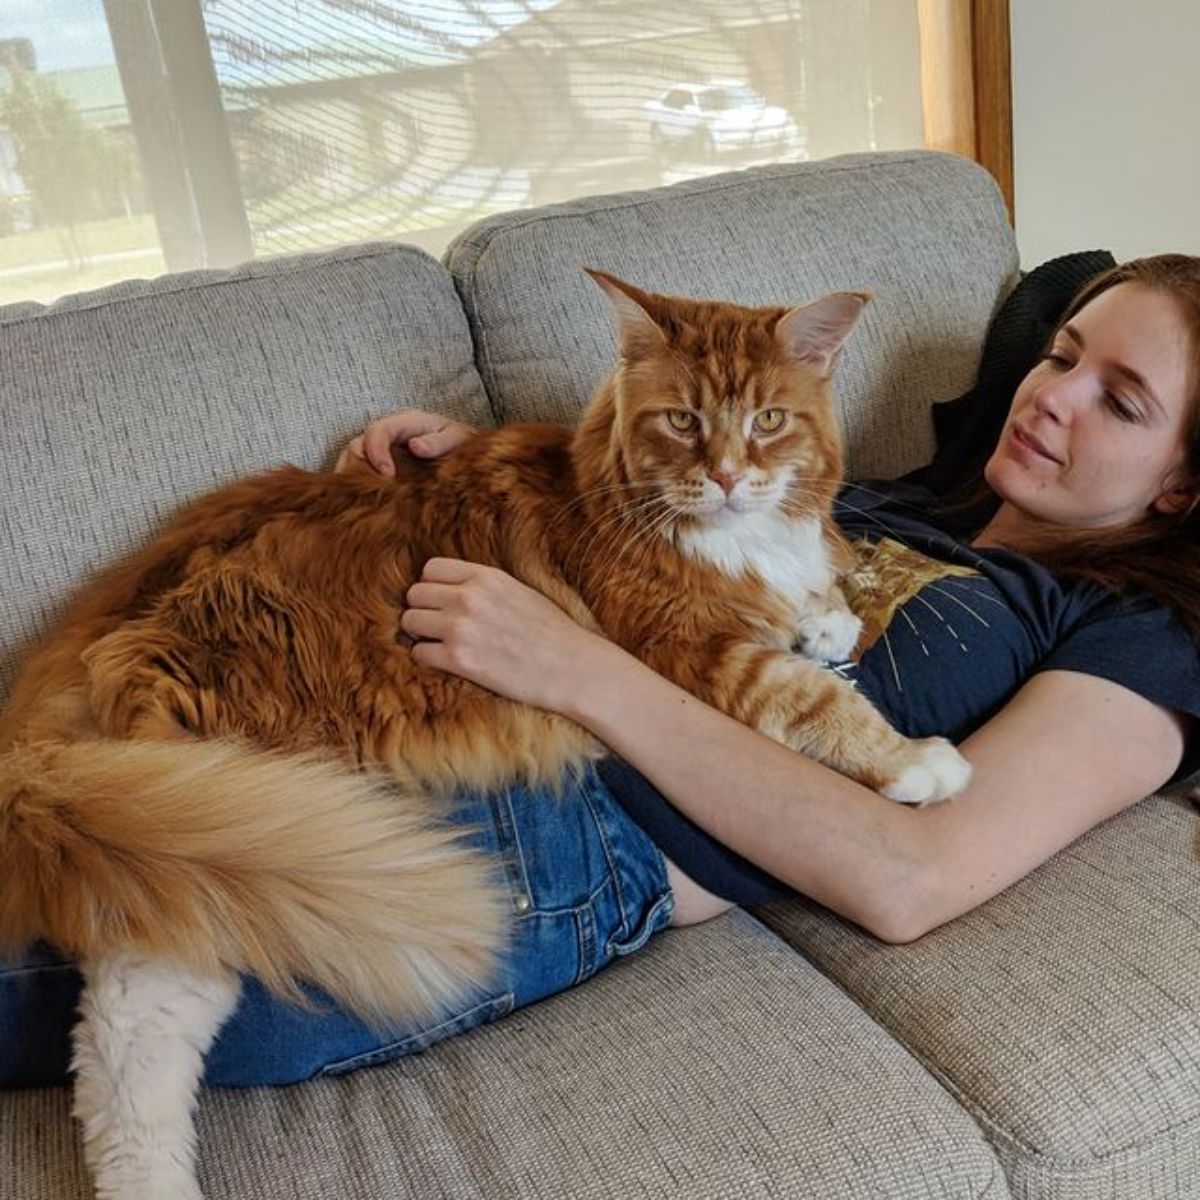 A big ginger maine coon lying on a young woman on a sofa.